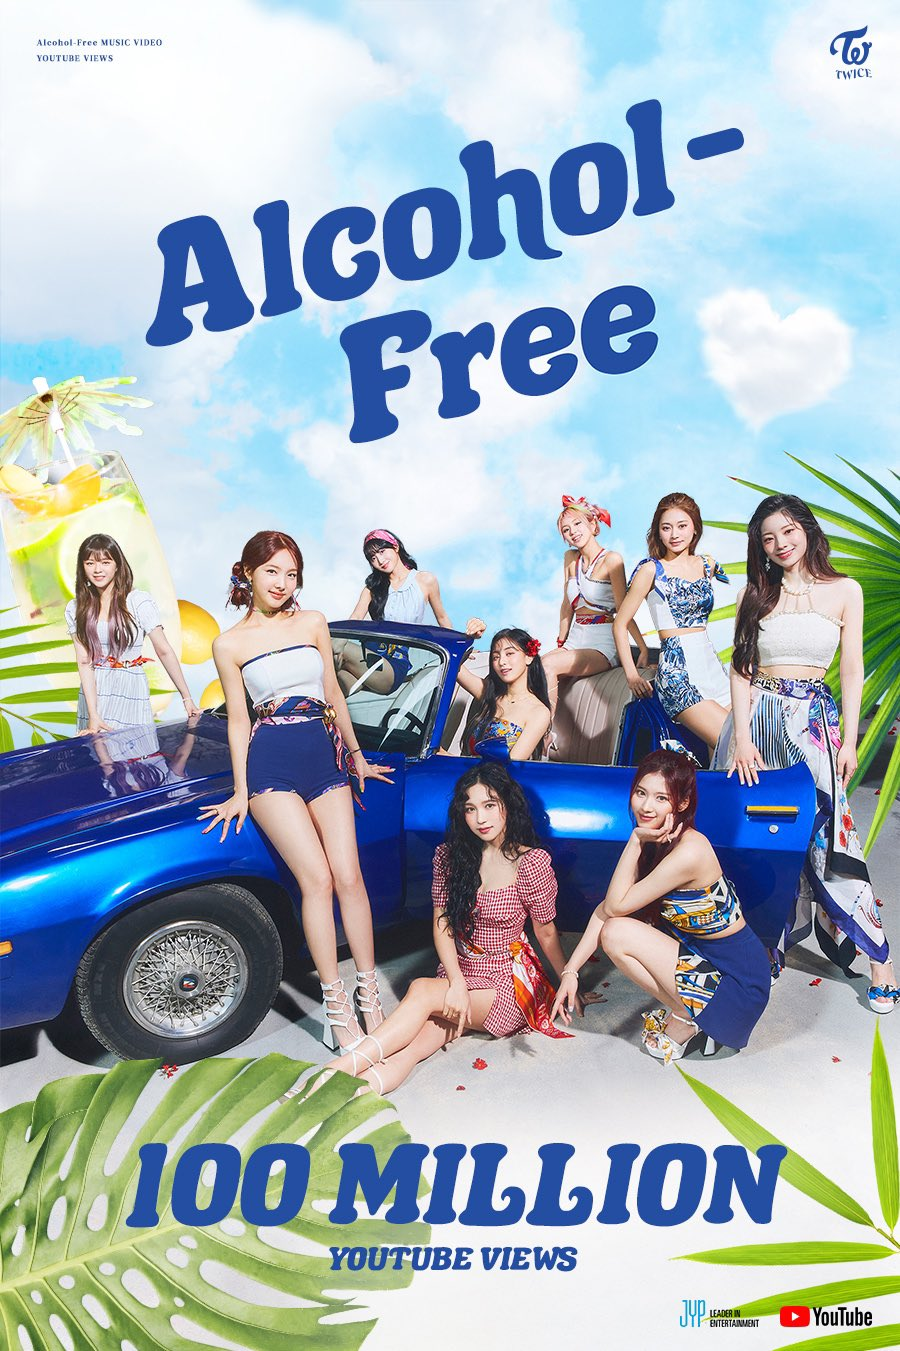 TWICE on Their Sisterhood, Supporters, and Summer Single 'Alcohol-Free